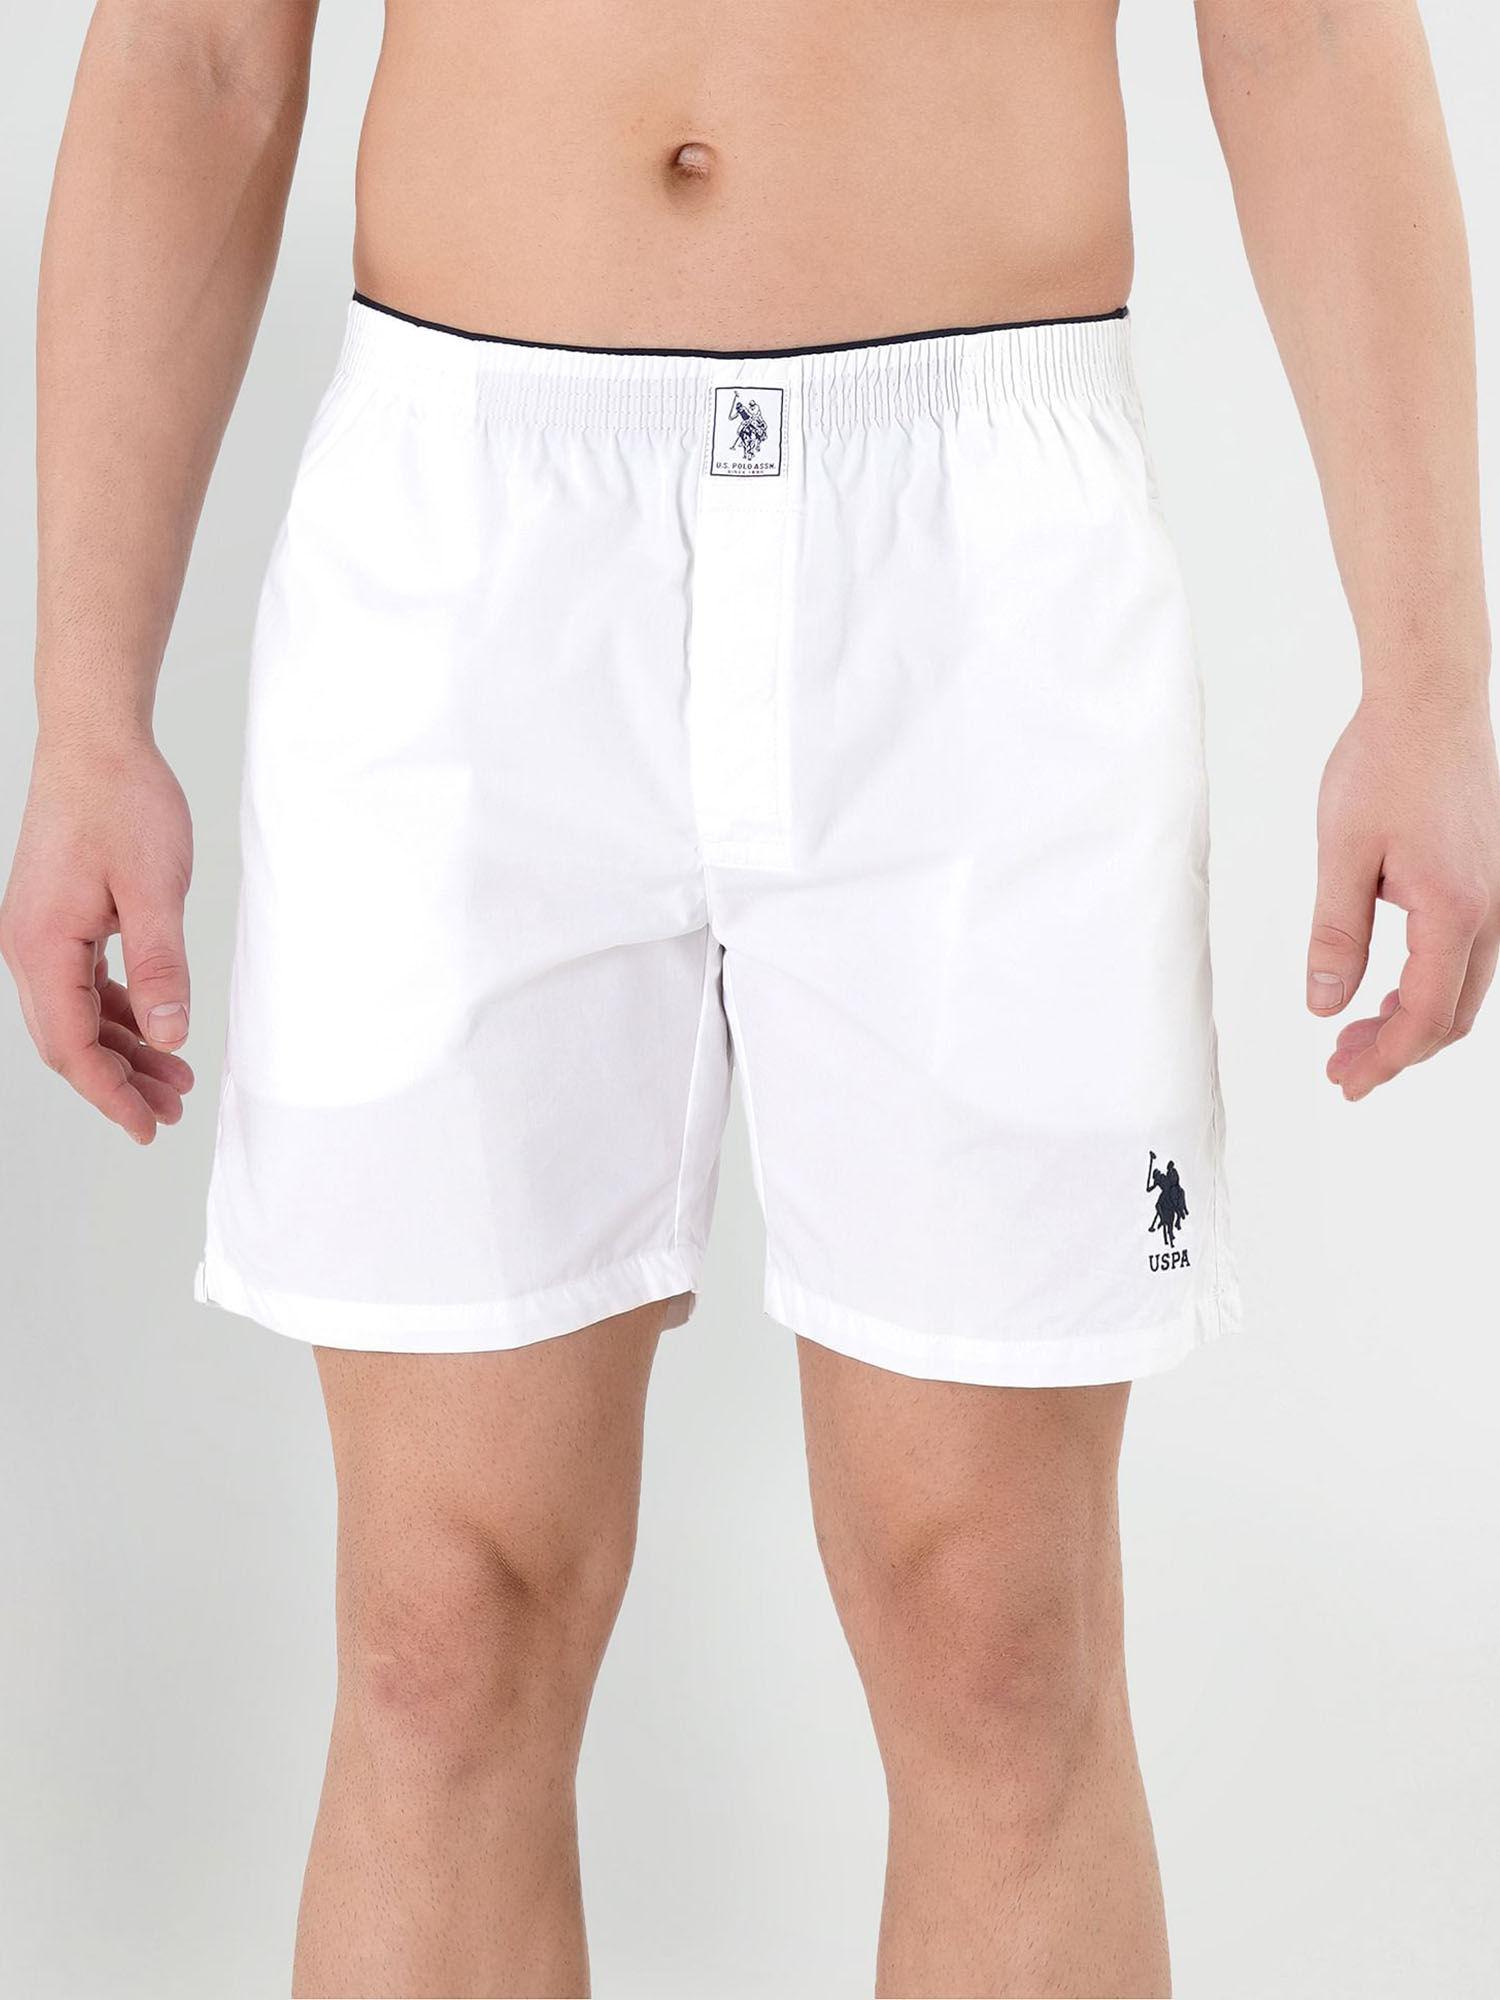 i108 comfort fit solid white cotton boxers white